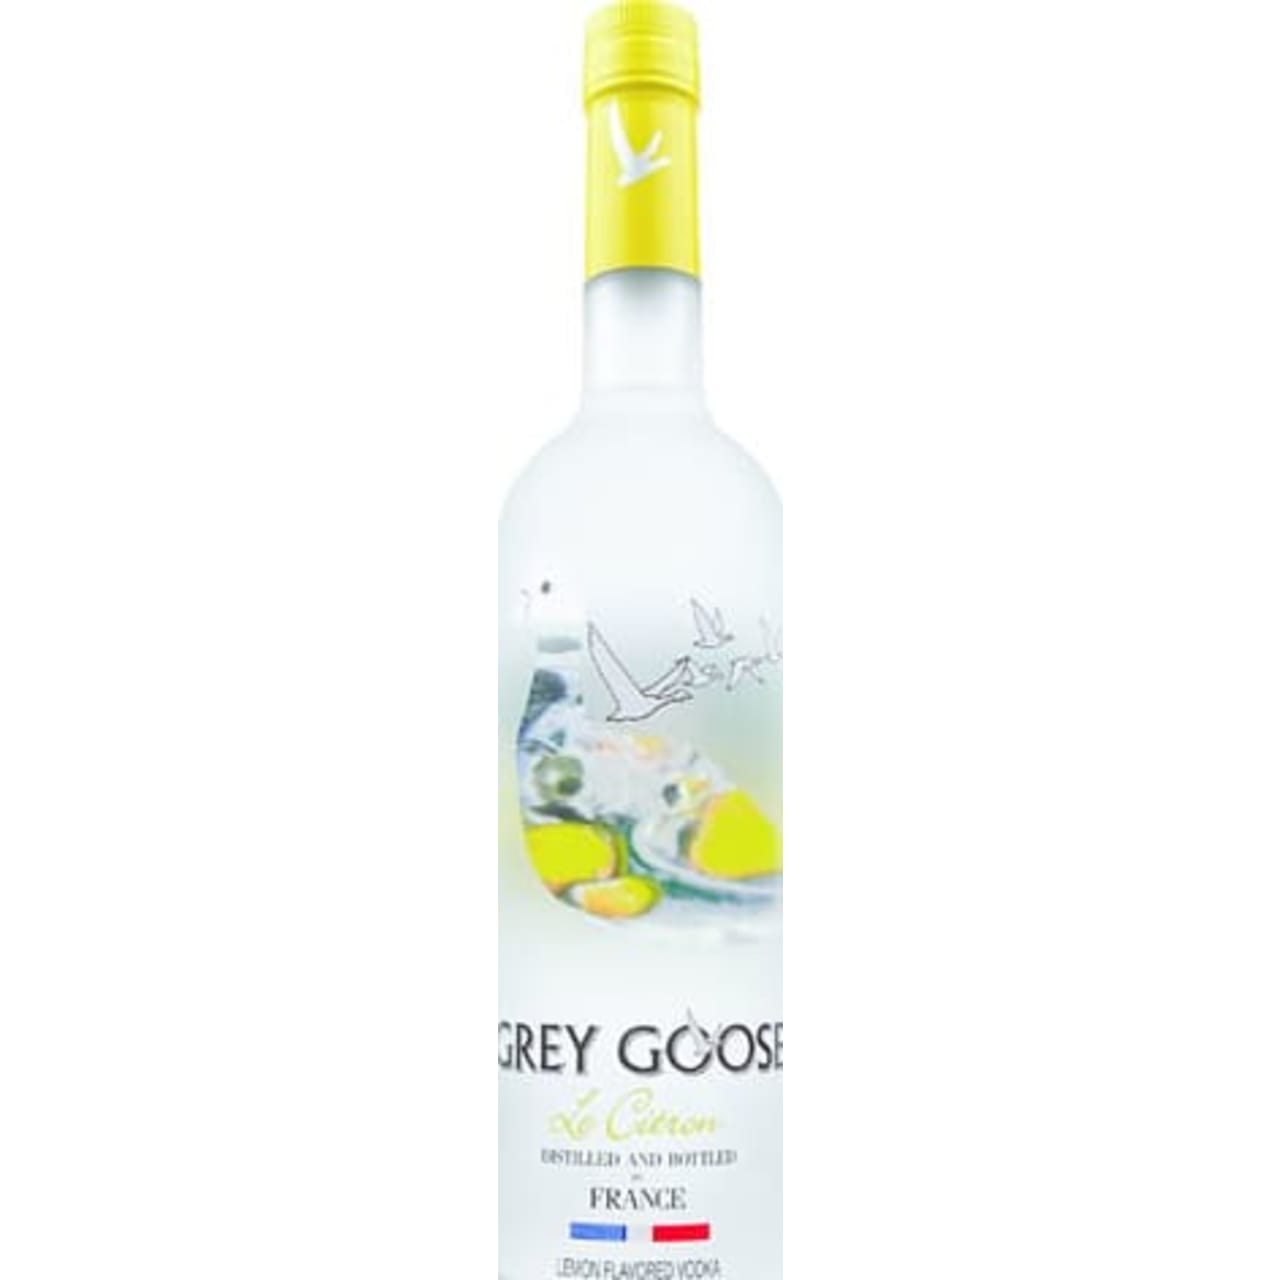 Grey Goose Citrus vodka is accented with the light zest of fresh lemons and the ripe sweetness of the lemon pulp. The taste is refreshing, bright and elegant.